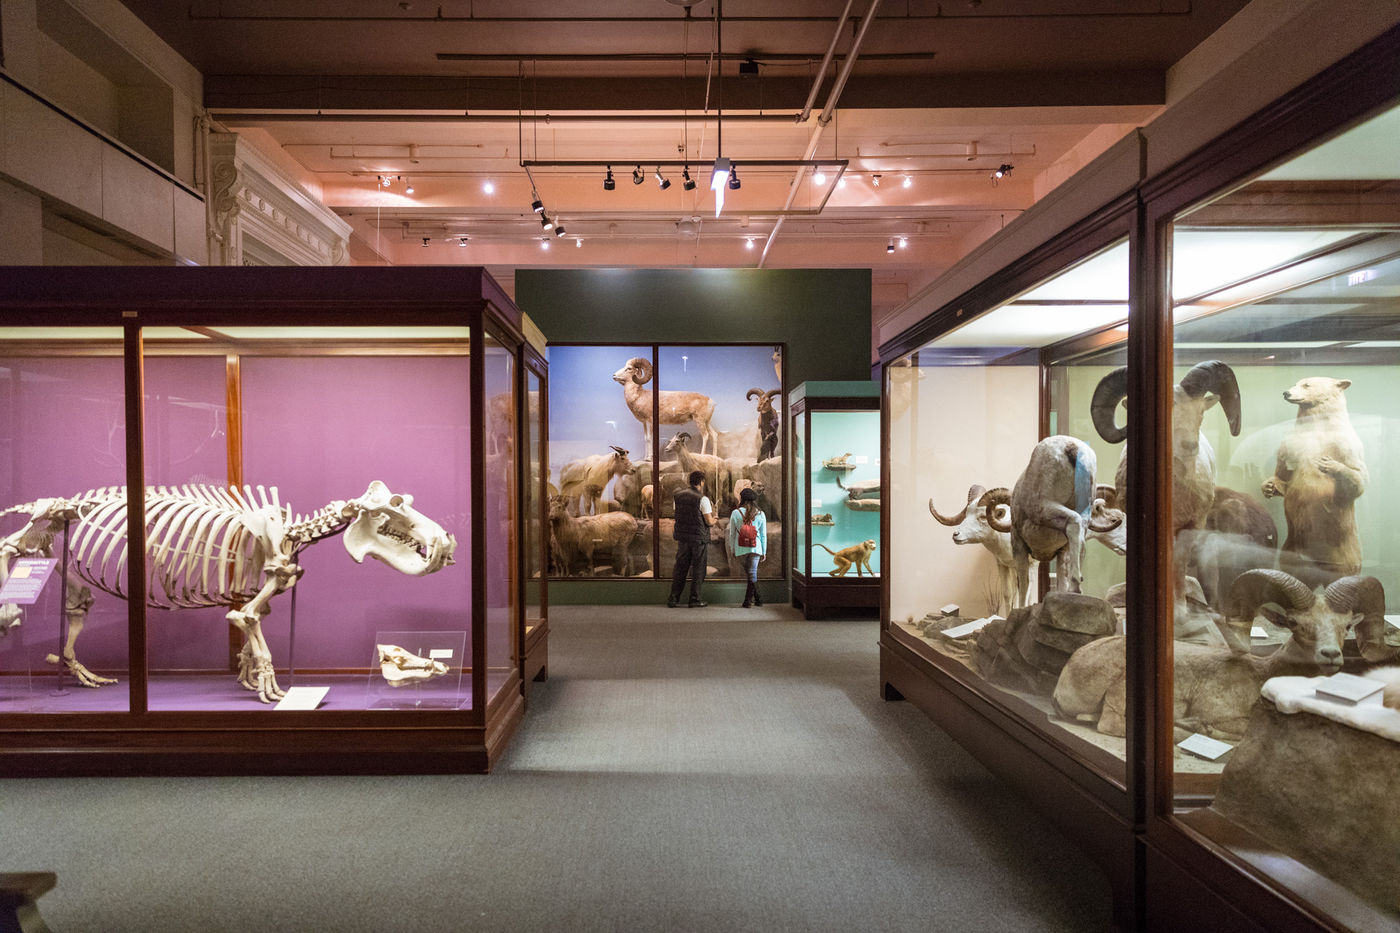 Wander through a mesmerizing maze of dioramas in Animal Biology to learn about groups of animals that are related or share habitats.